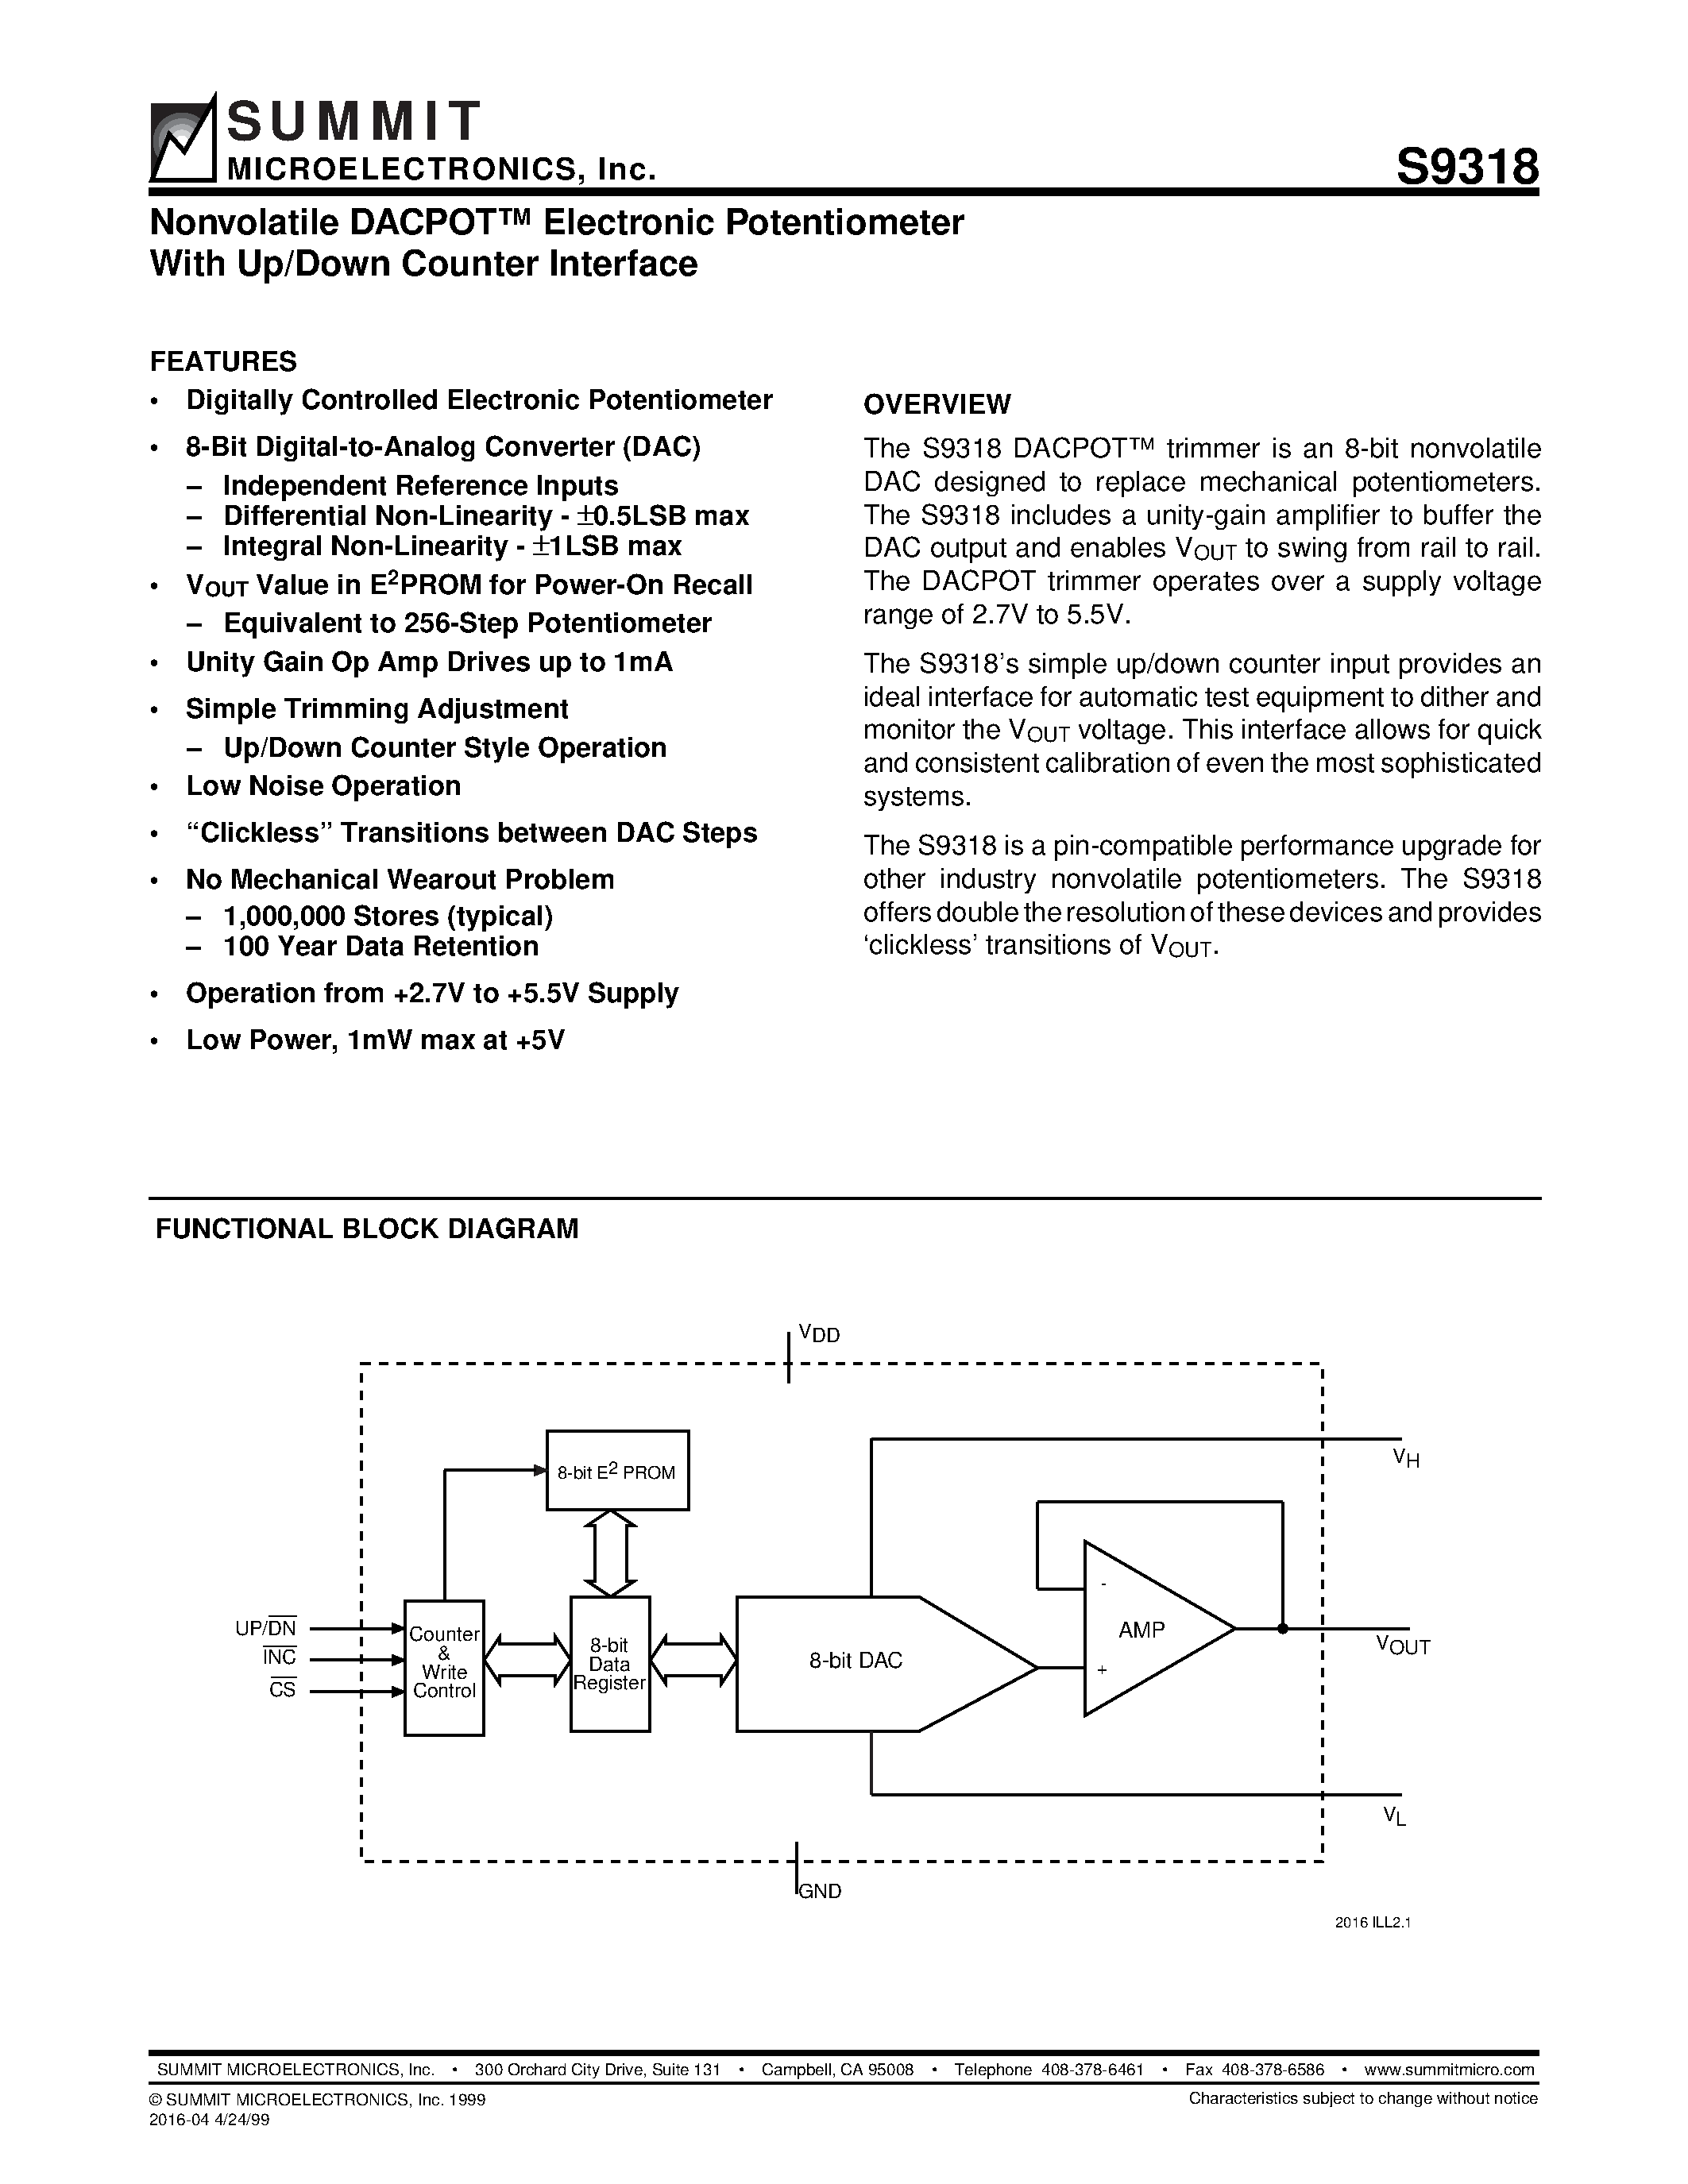 Datasheet S9318S - Nonvolatile DACPOT Electronic Potentiometer With Up/Down Counter Interface page 1